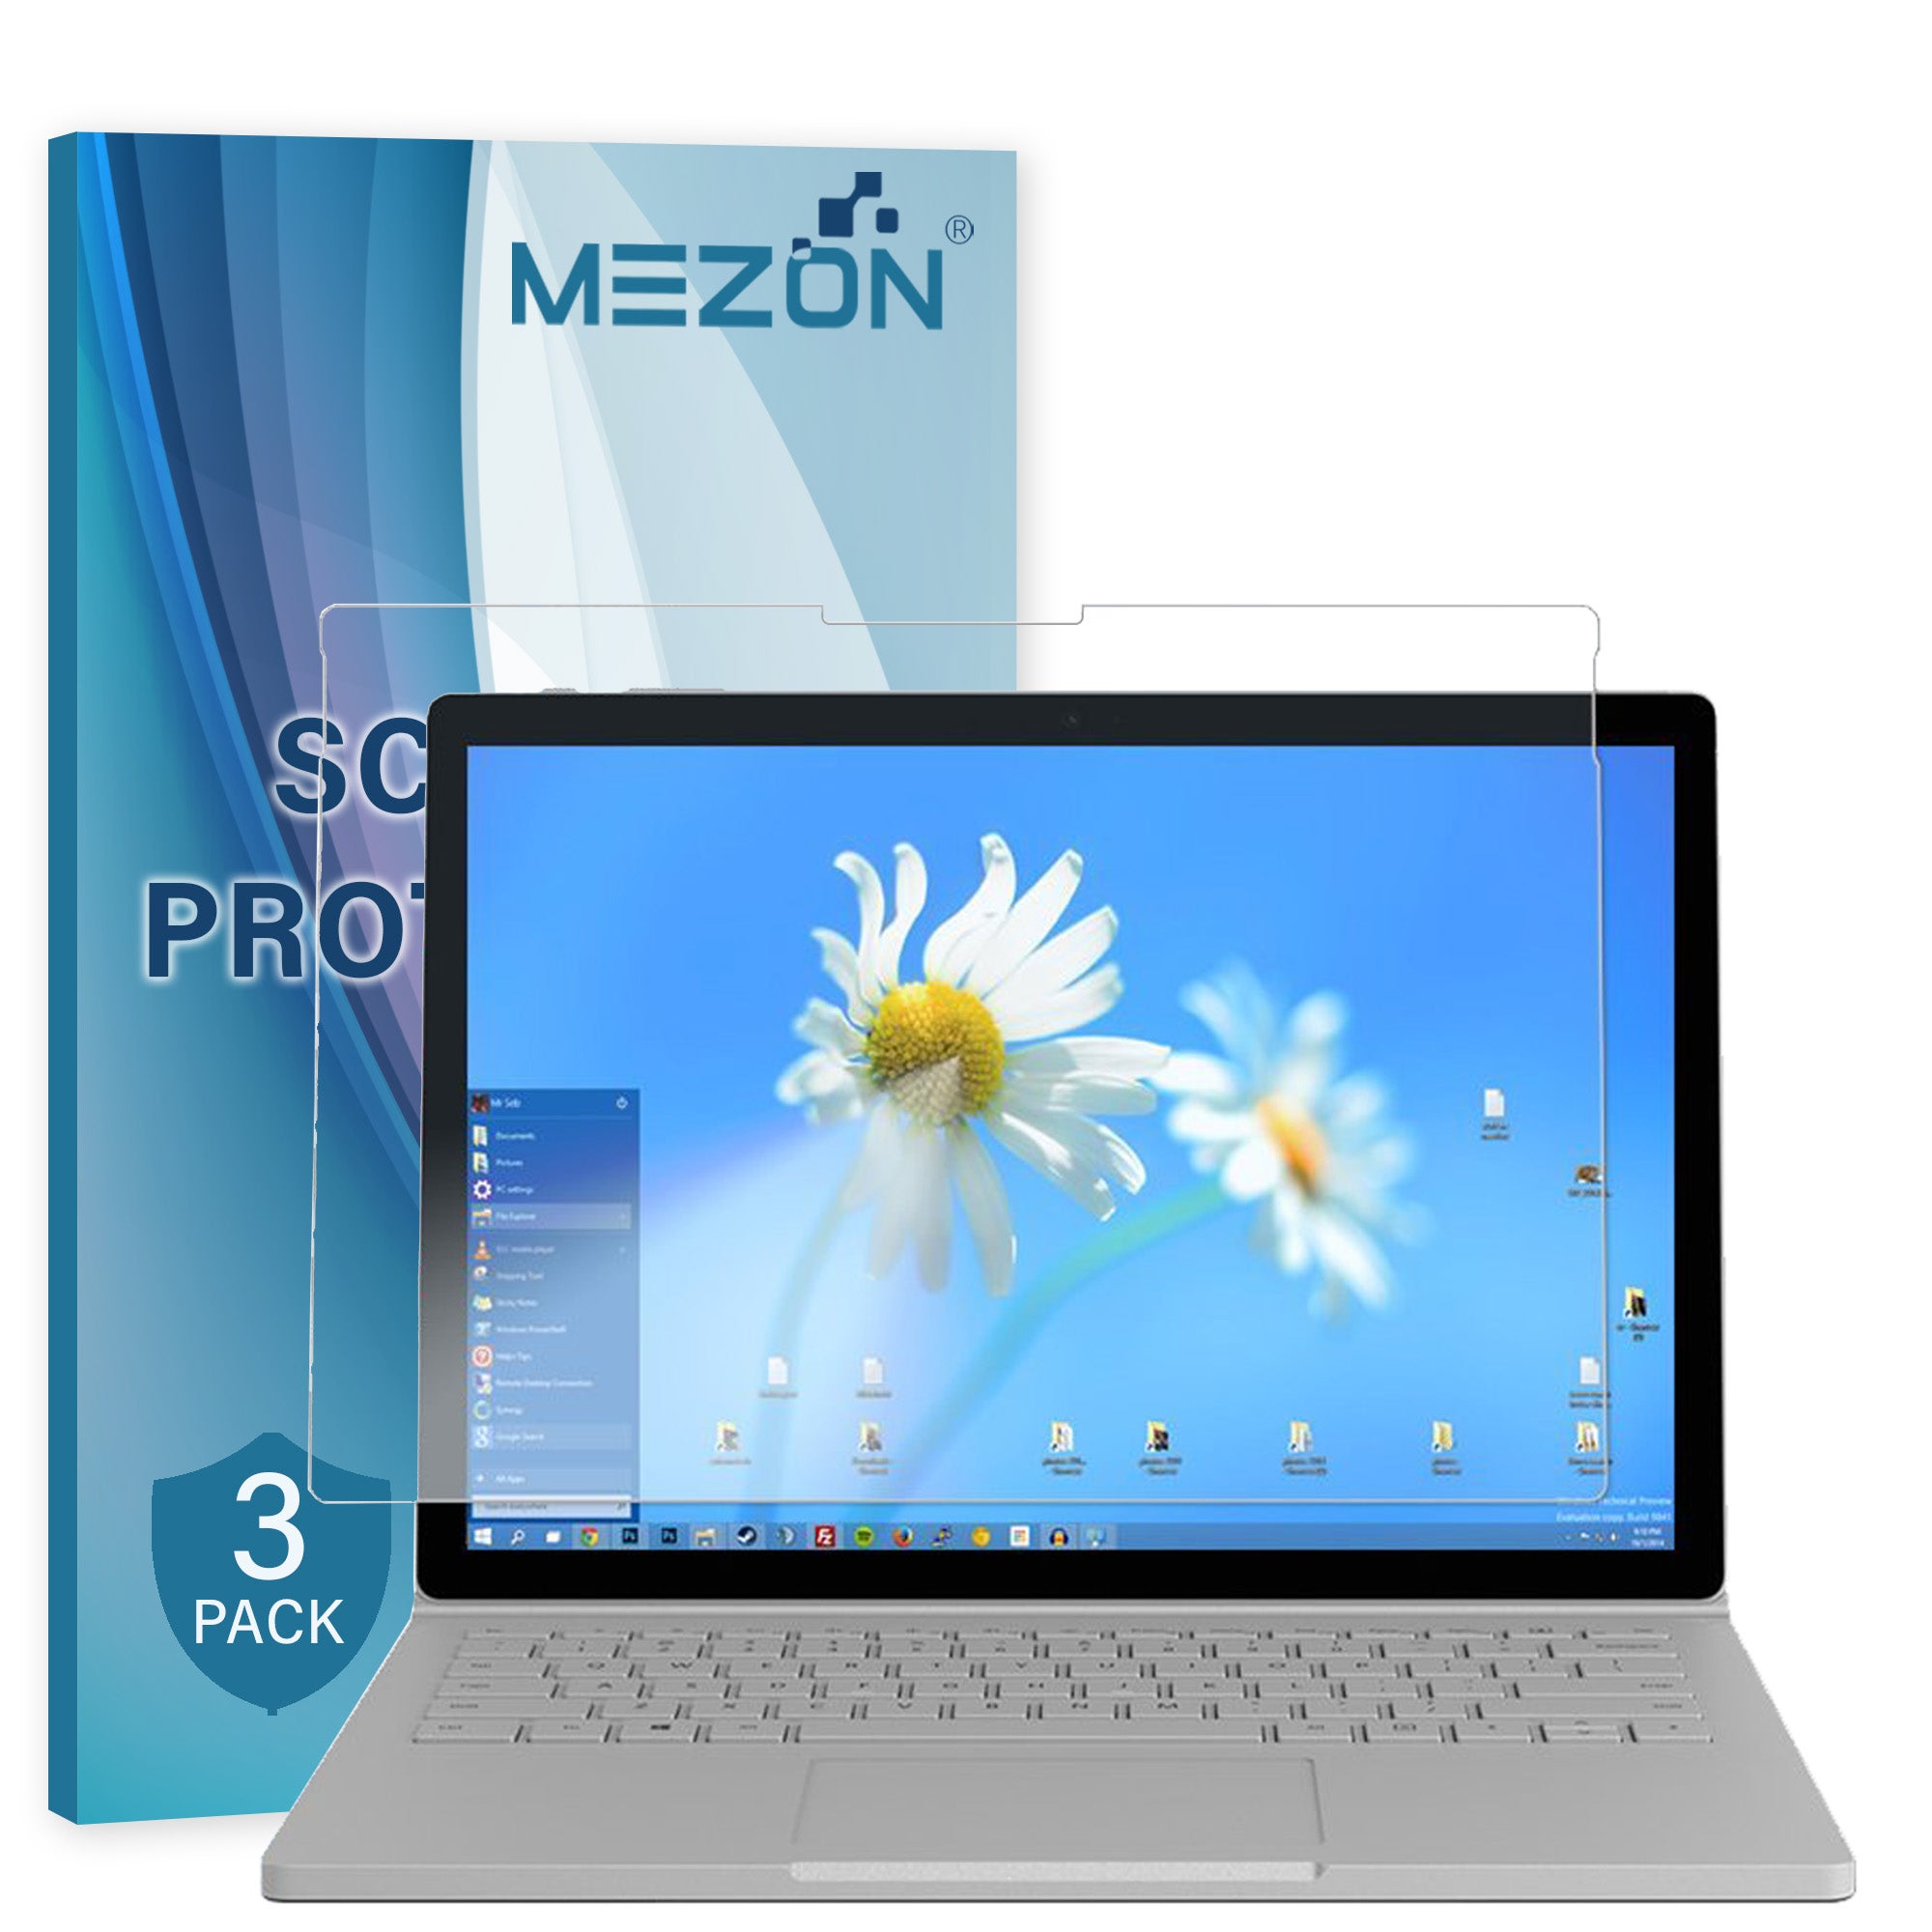 [3 Pack] Microsoft Surface Book 2 (13.5") Anti-Glare Matte Film Screen Protector by MEZON – Case and Surface Pen Friendly, Shock Absorption – FREE EXPRESS